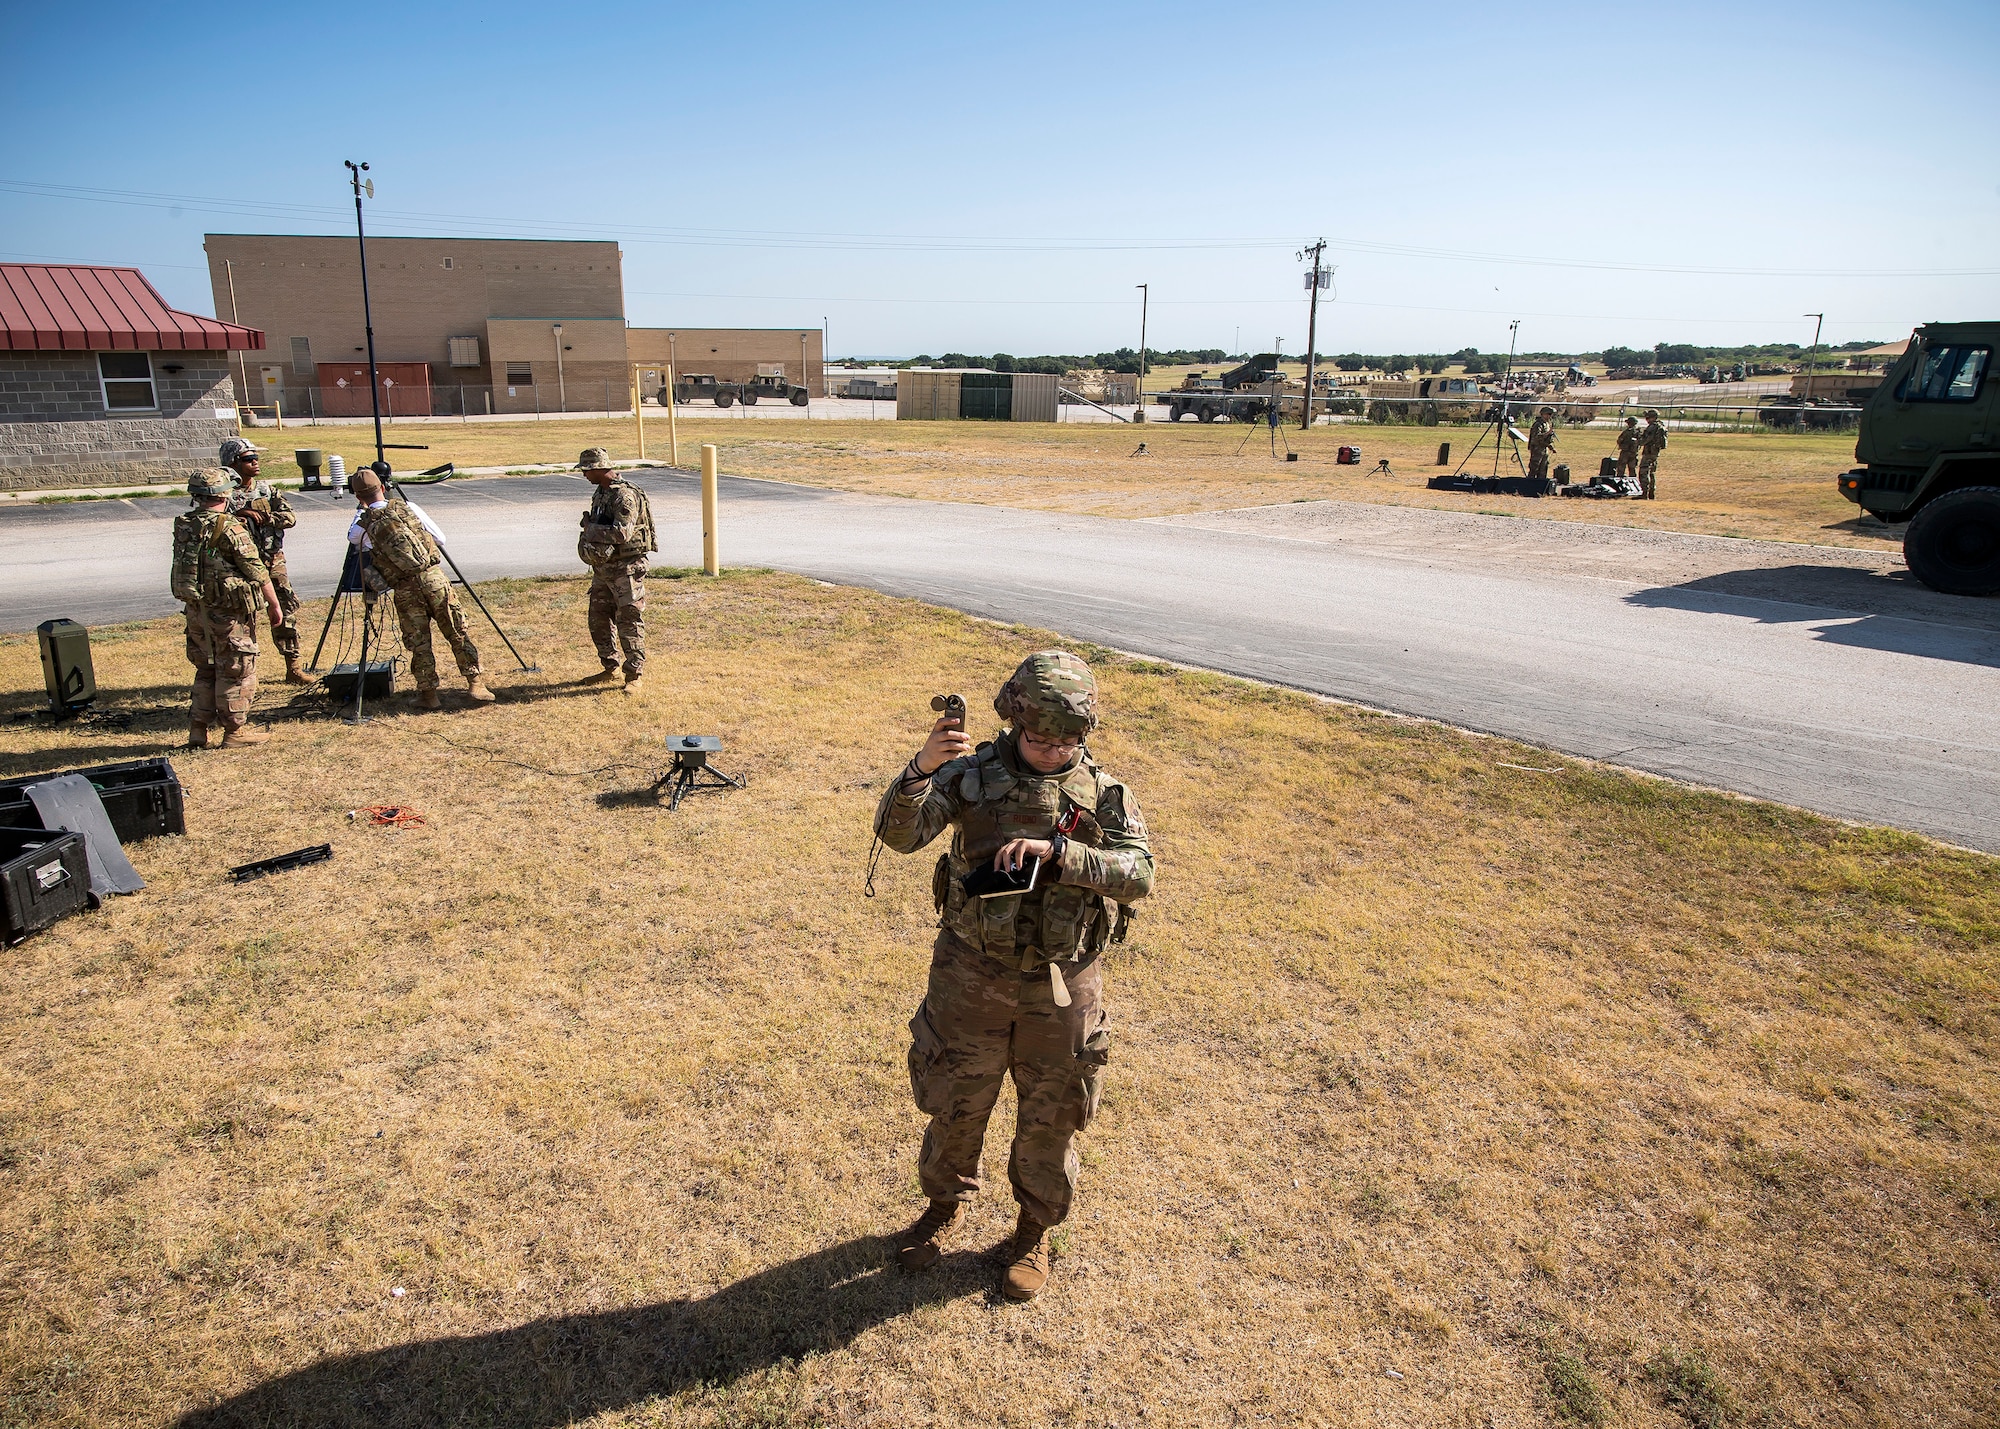 Senior Airman Mary-Morgan Rubio, front, 3d Weather Squadron (WS) Det 2 weather forecaster, reads a kestrel meter during a certification field exercise (CFX), July 29, 2019, at Camp Bowie Training Center, Texas. The CFX was designed to evaluate the squadron’s overall tactical ability and readiness to provide the U.S. Army with full spectrum environmental support to the Joint Task Force (JTF) fight. While deployed, the Army relies on the 3d WS to provide them with current ground weather reports. These reports are then employed by commanders on the ground as they plan the best tactics and approaches to accomplish the mission. (U.S. Air Force photo by Airman 1st Class Eugene Oliver)